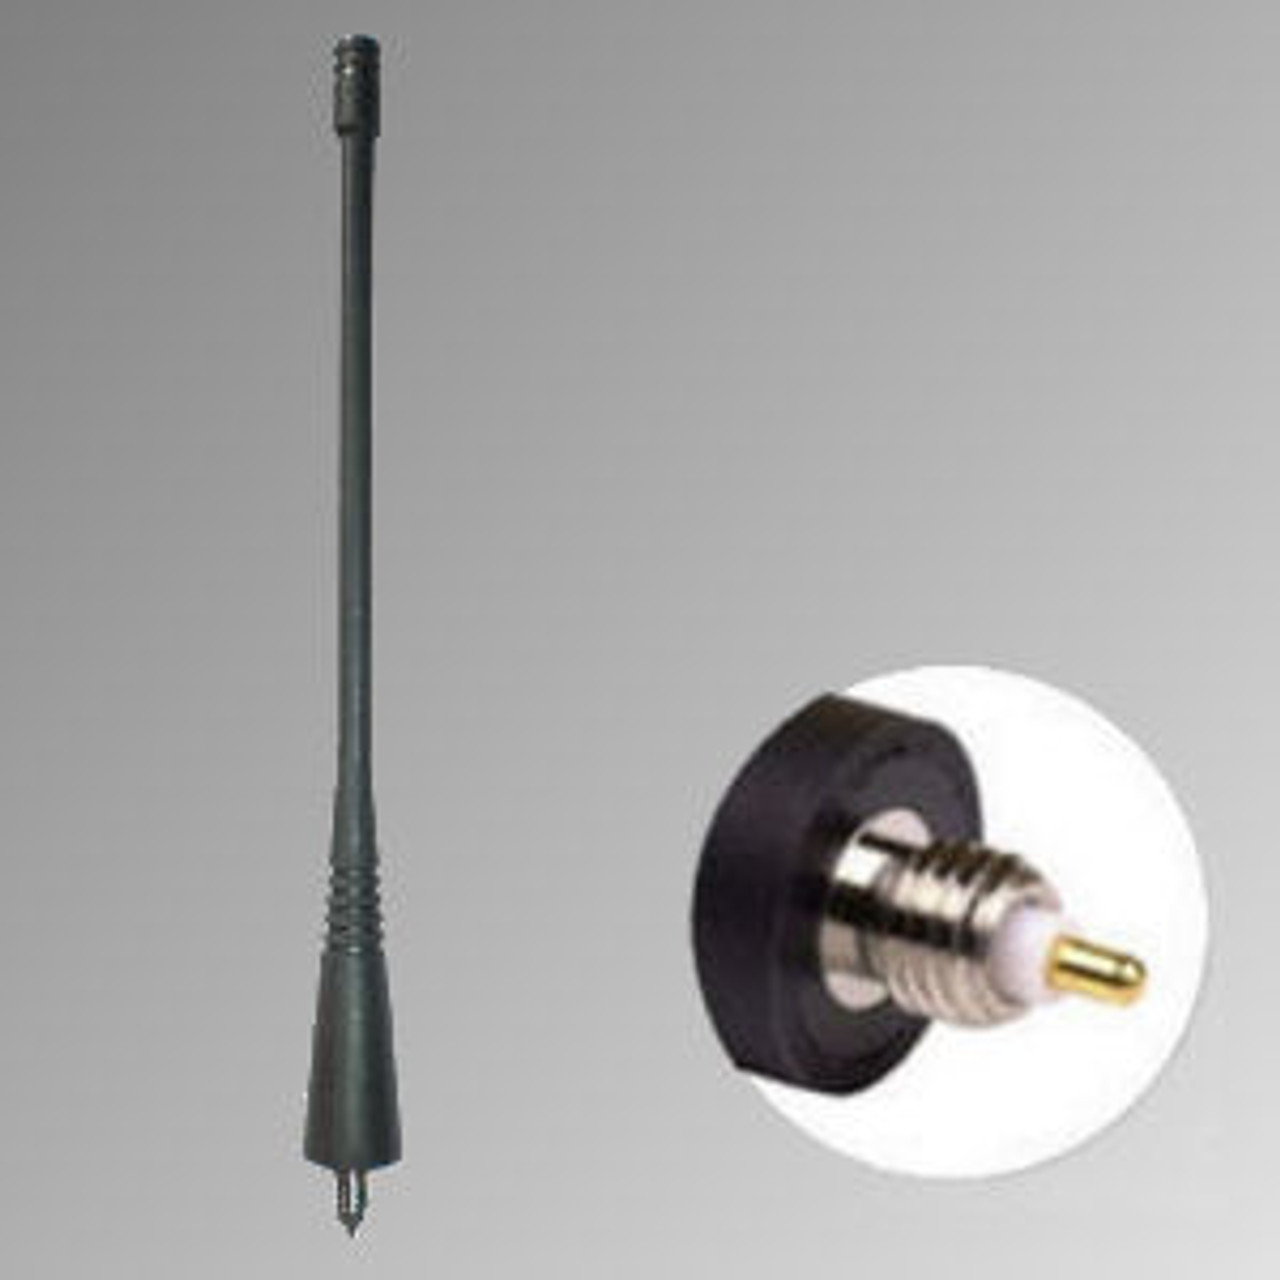 M/A-Com P7250 1/2 Wave Extended Range Antenna - 5.7", Dual-Band, 698-870 MHz